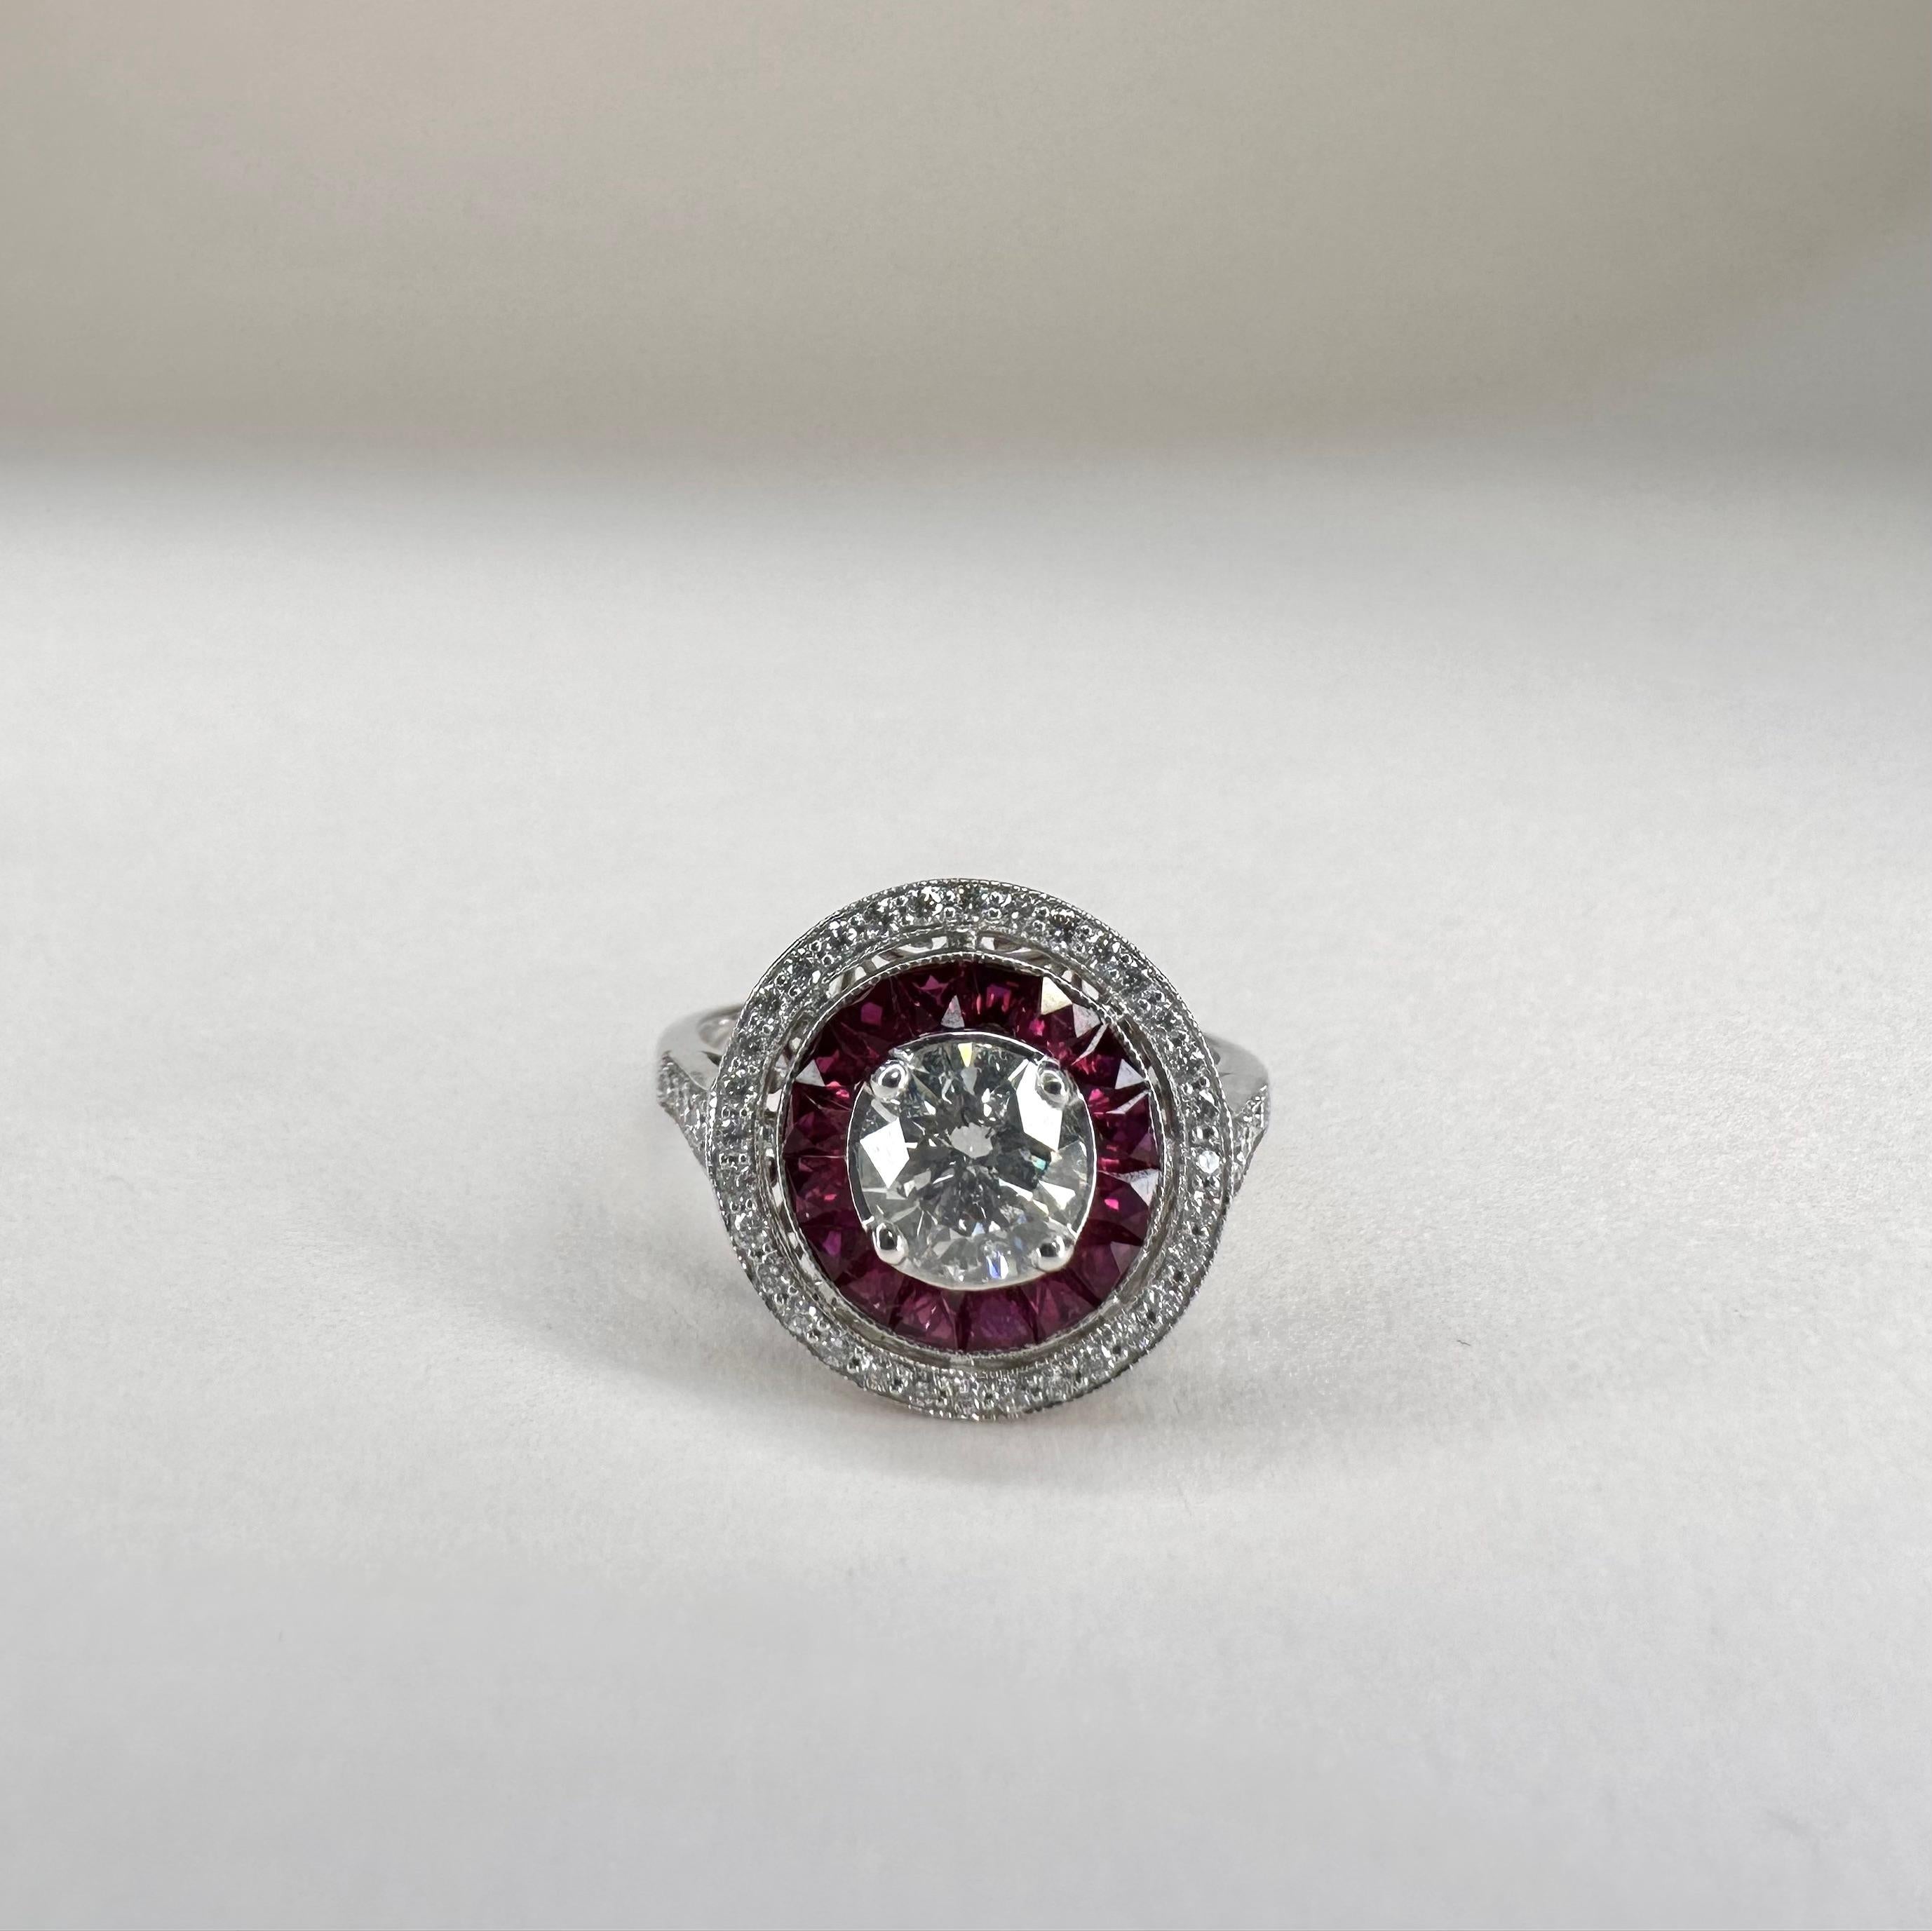 For Sale:  Art Deco Platinum 0.65 Cts Calibre Cut Ruby and 0.77 Ct Diamond GIA Certified 4